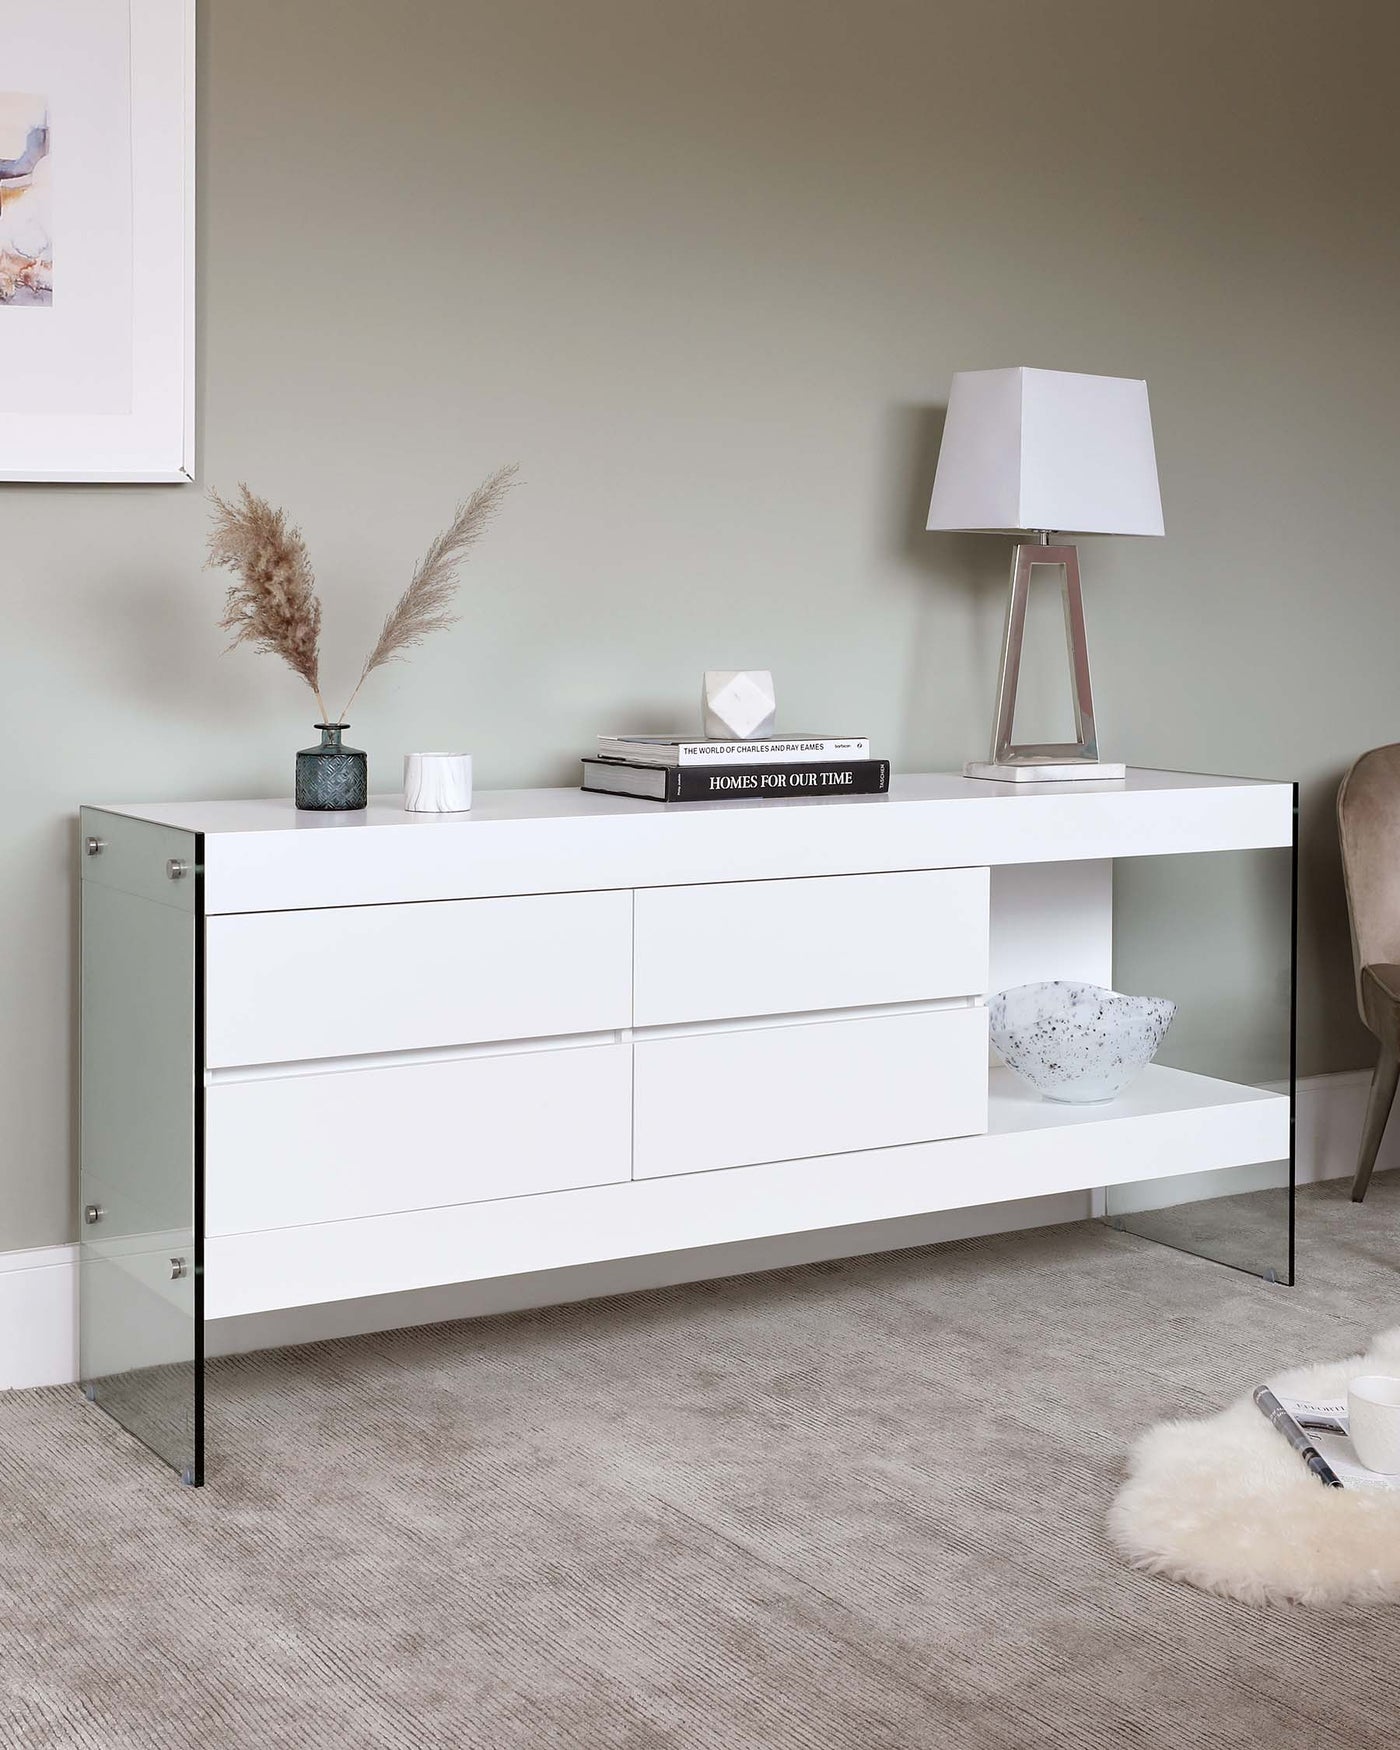 Modern white sideboard with sleek drawers and black metal accents, featuring an integrated shelf space on the right. The piece is styled with a table lamp, decorative books, a vase with dried pampas grass, and a modern textured bowl.